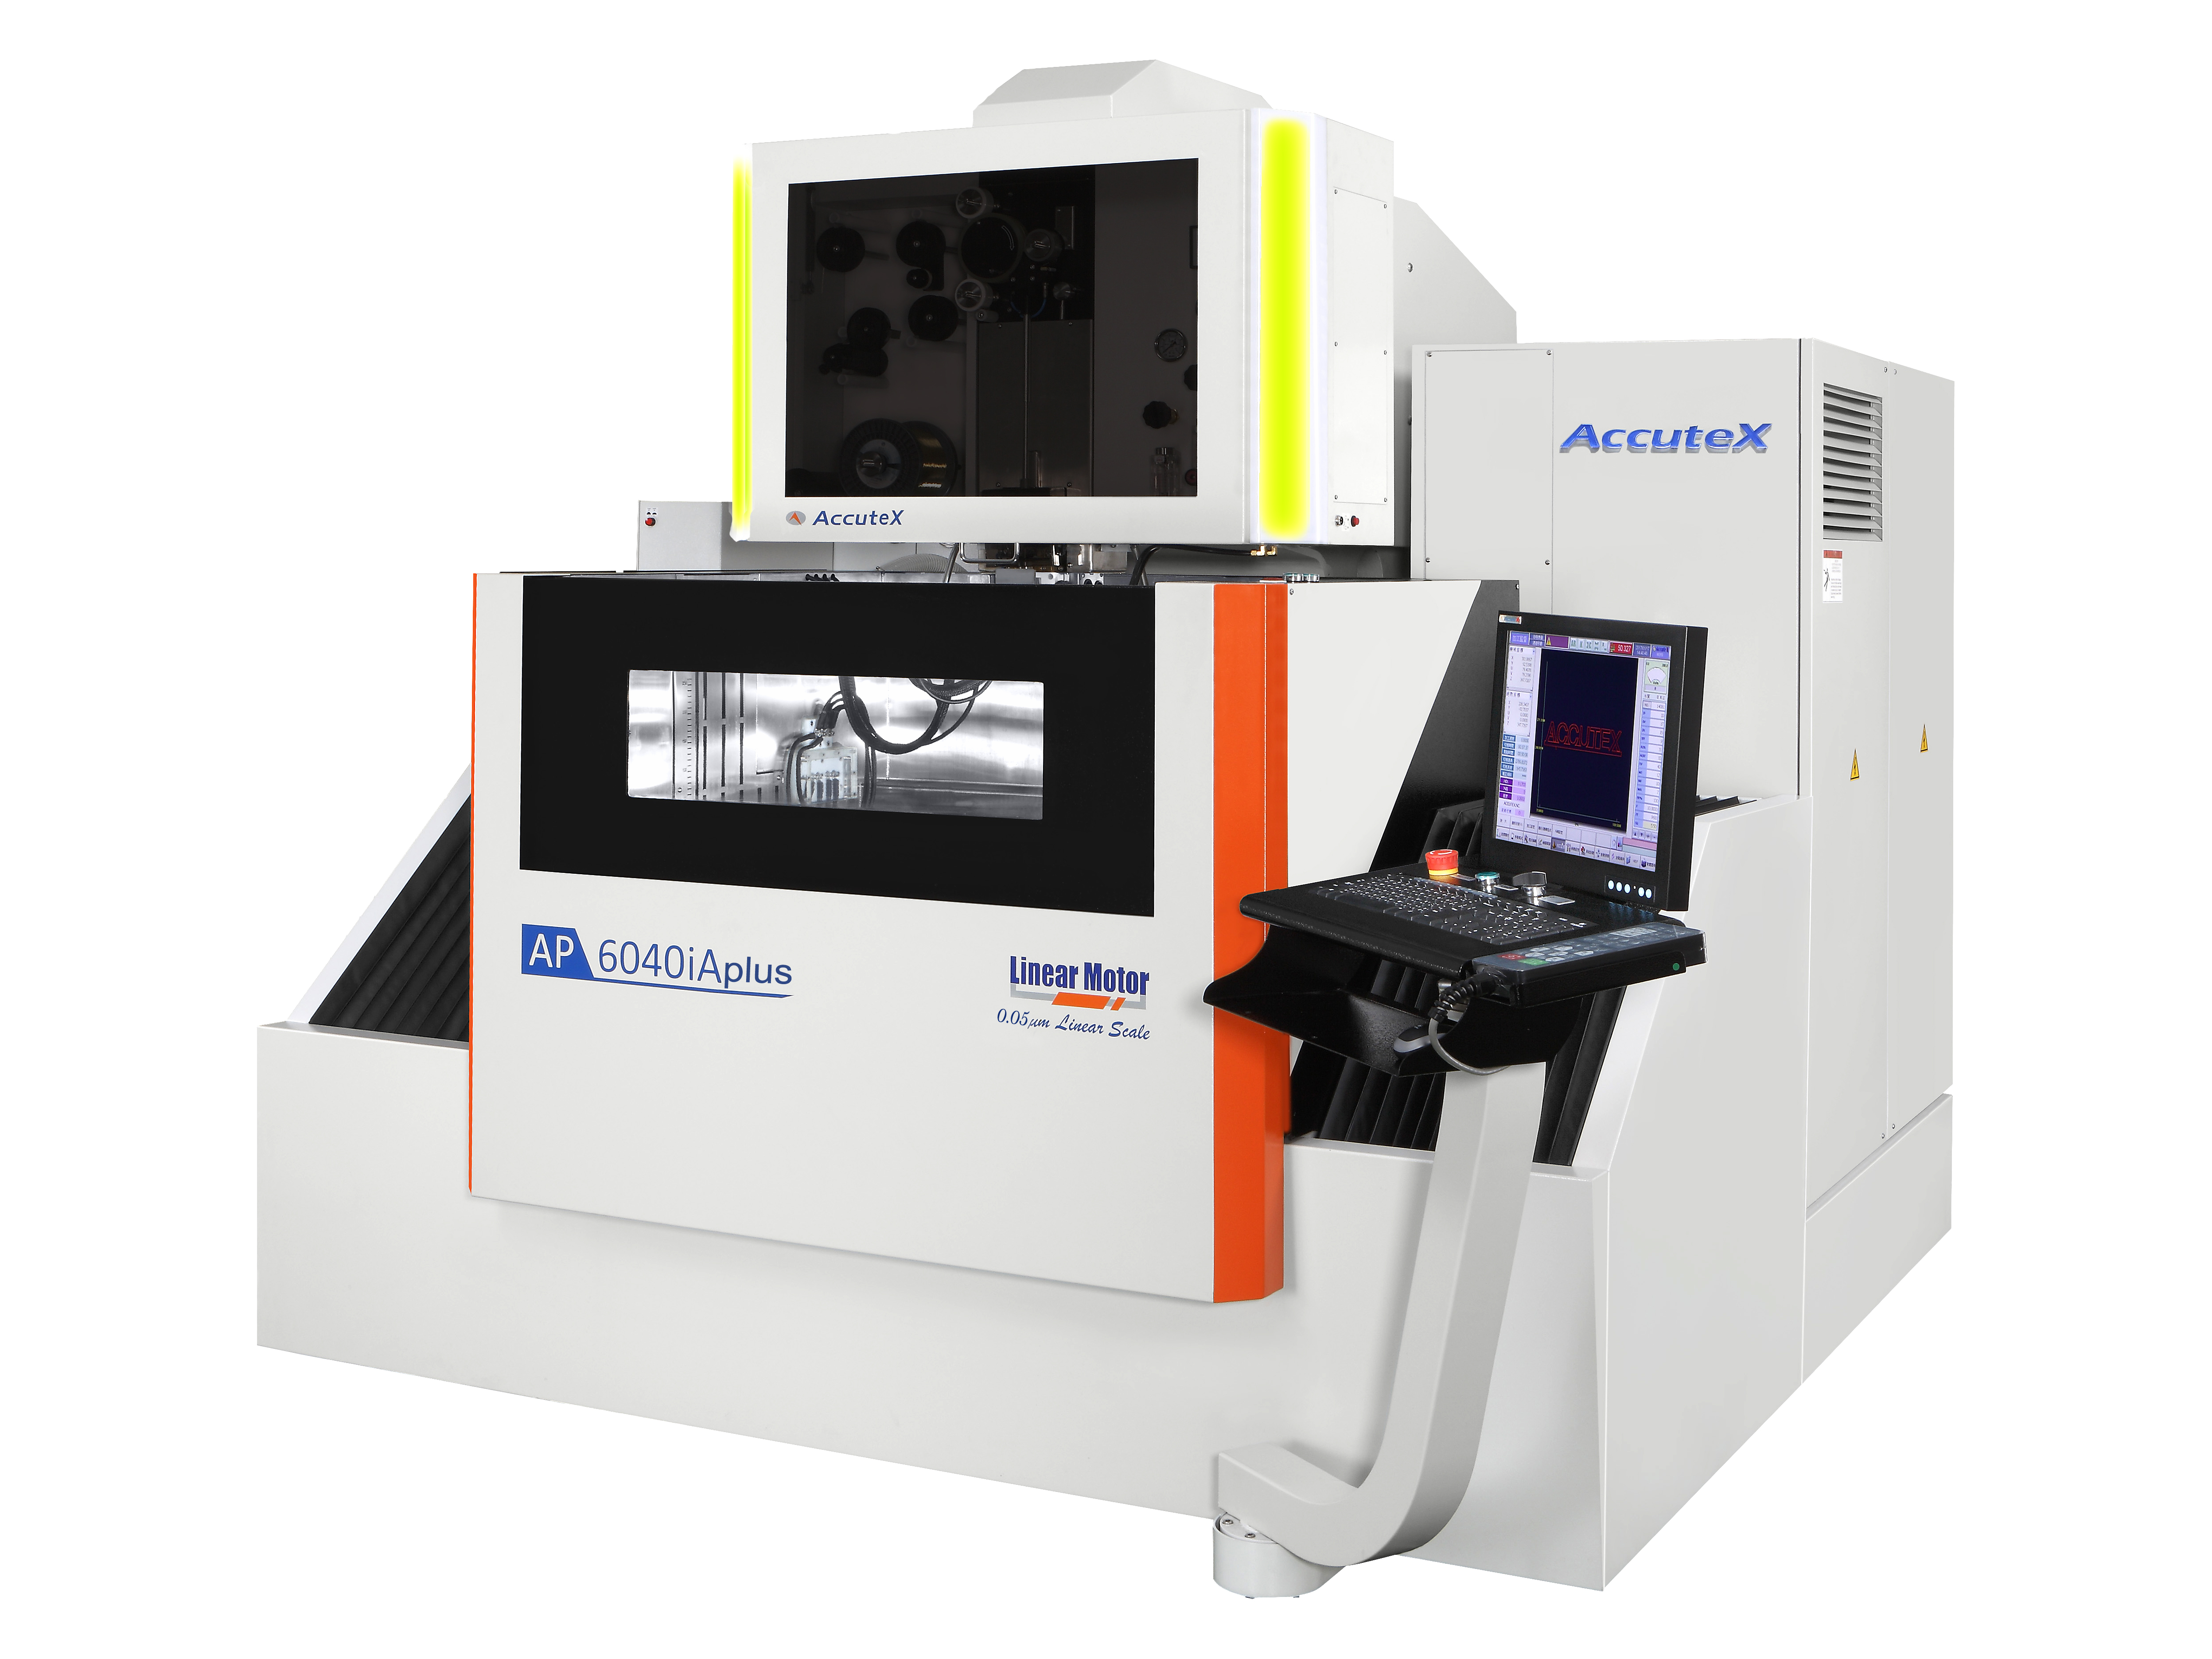 Absolute Machine Tools Offers the AccuteX AP Series Ultra Performance Wire EDM for Maximum Rigidity During High-Speed Cutting Operations